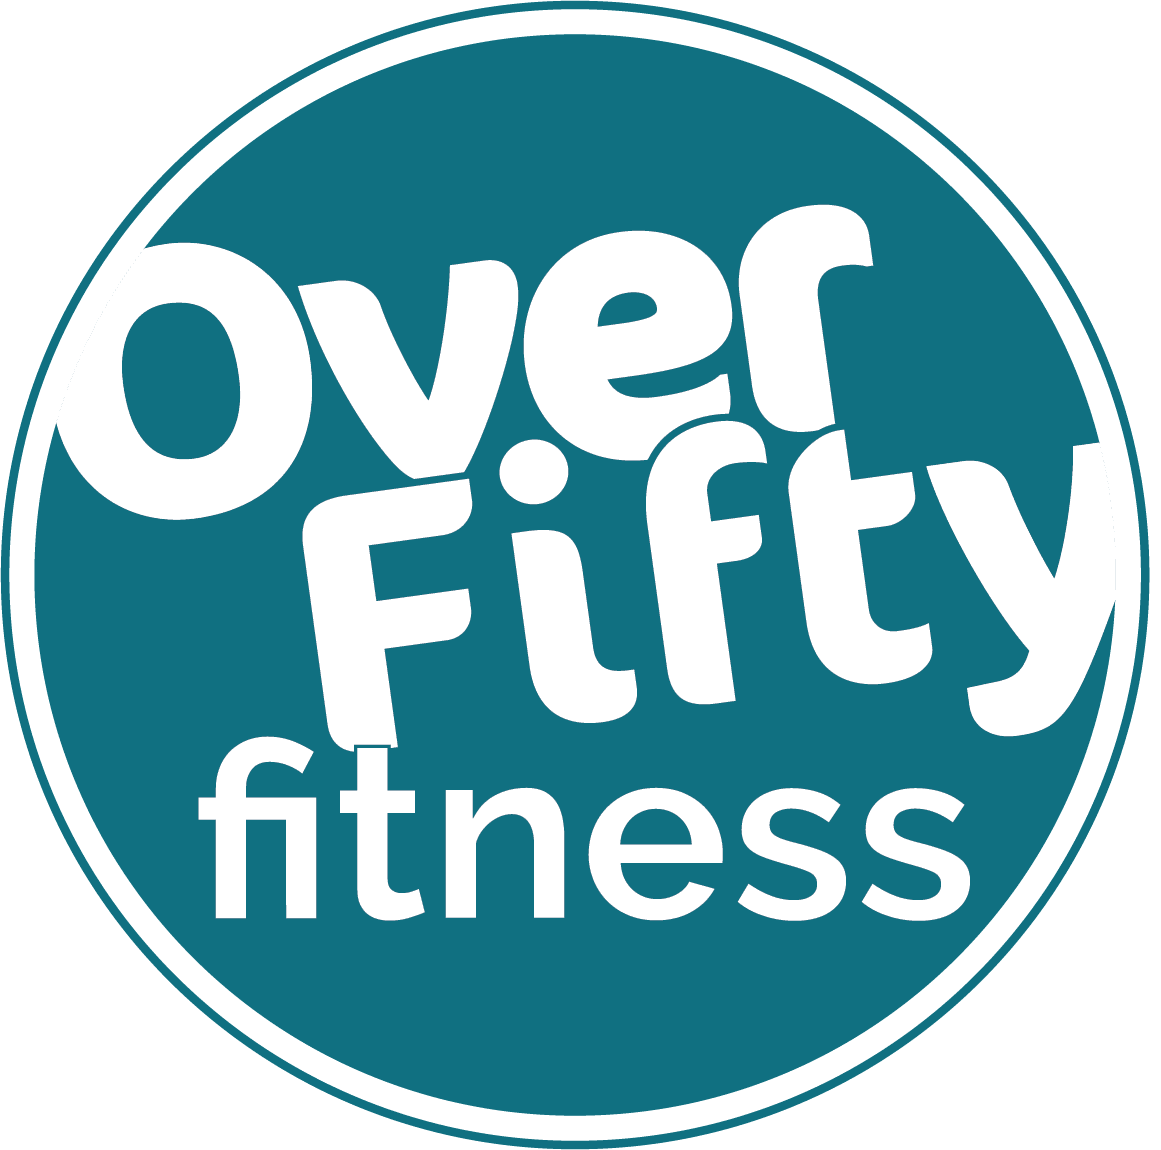 Over Fifty Fitness circle logo